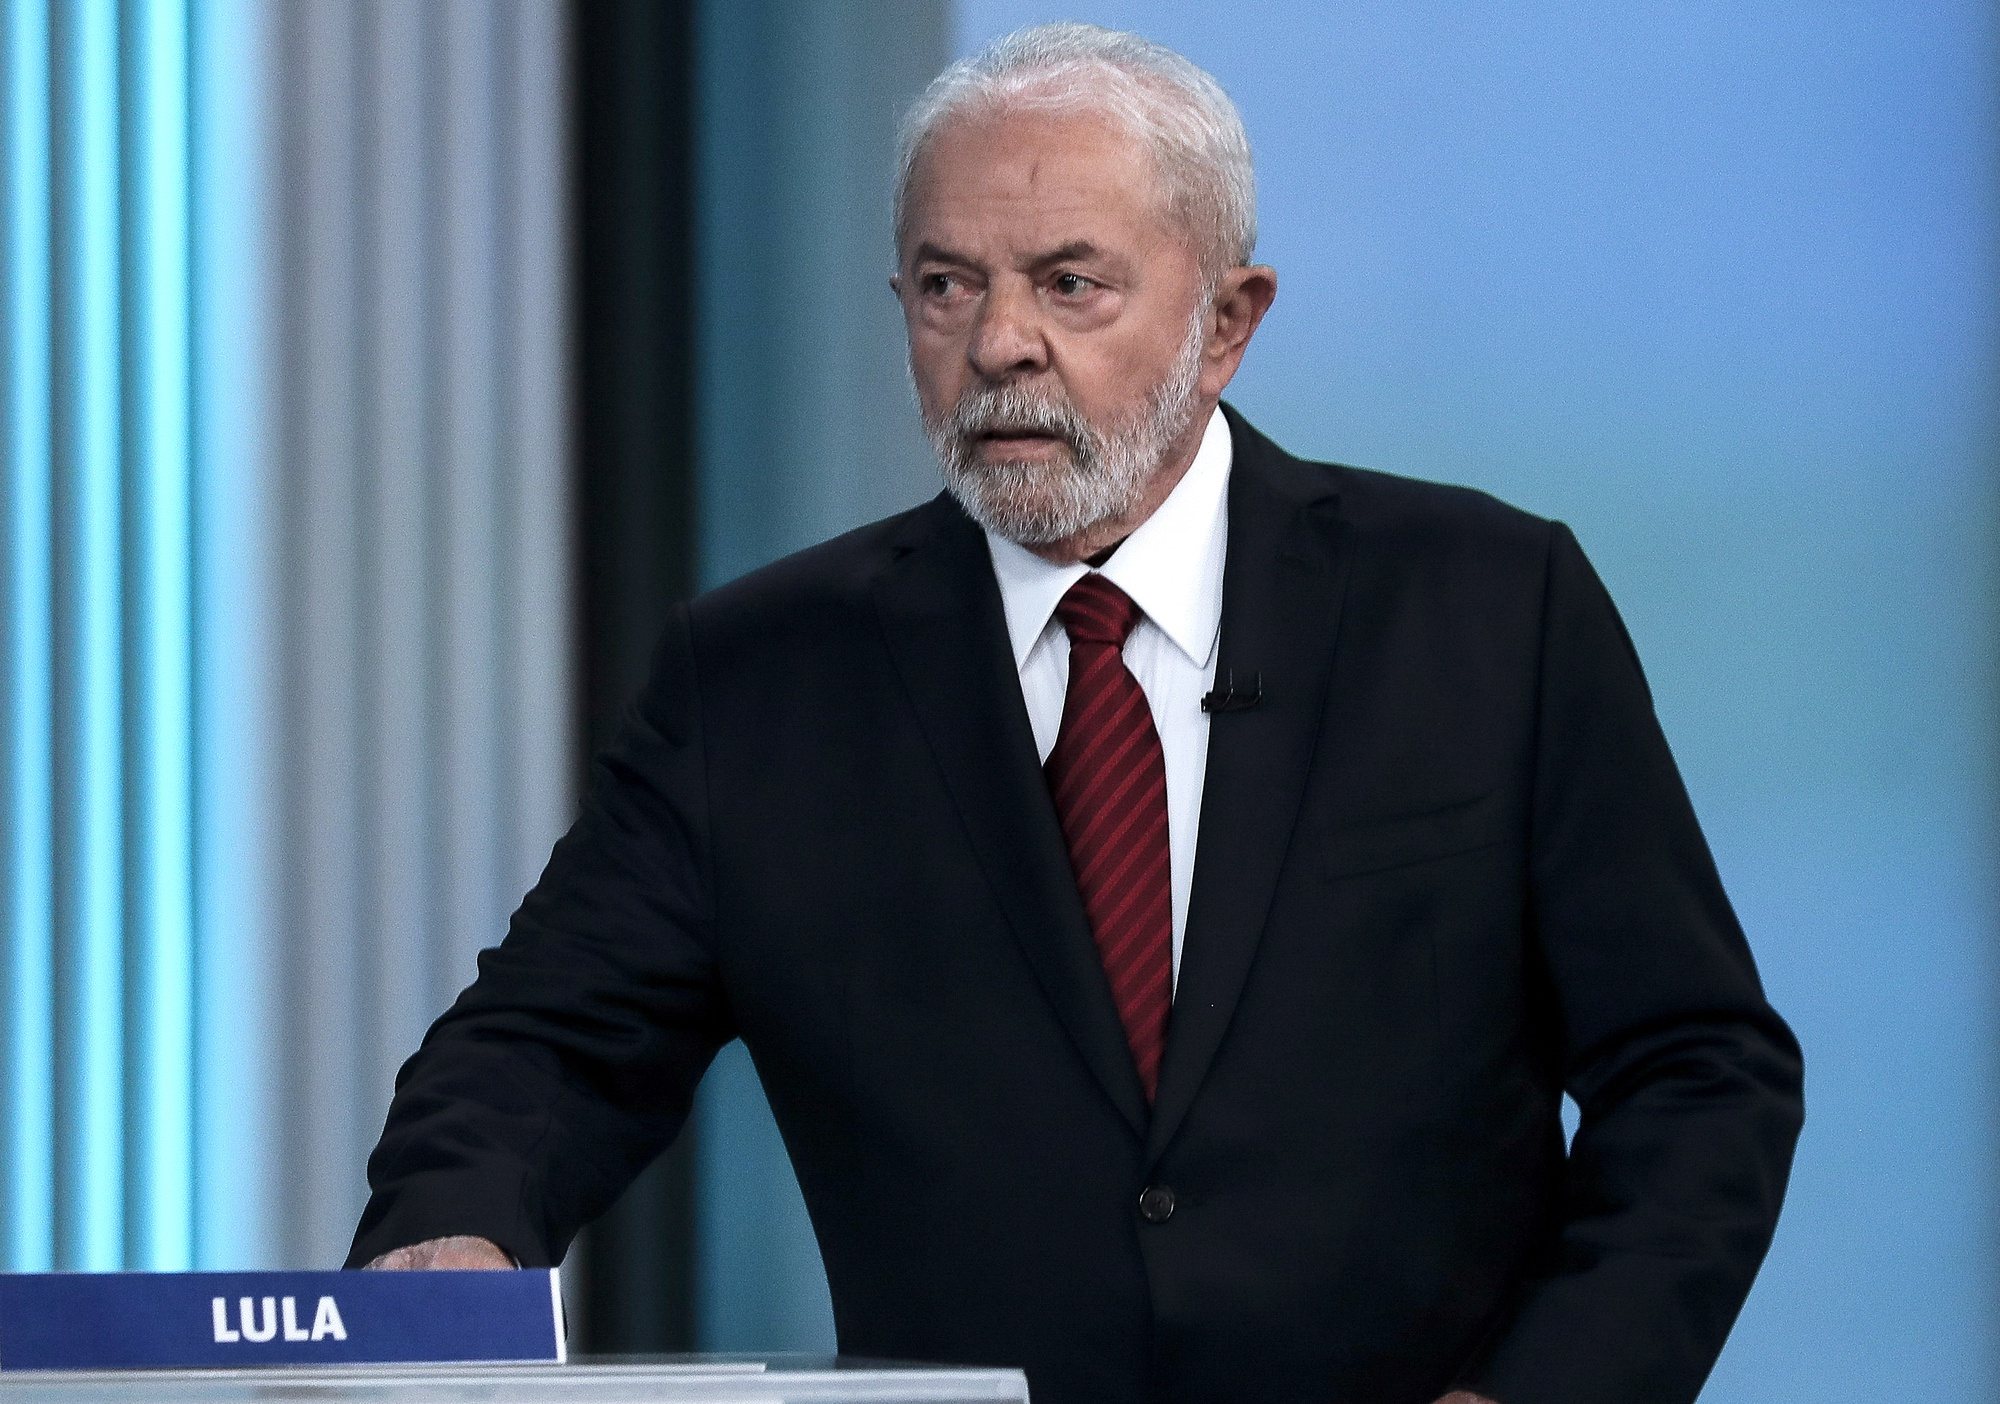 epa10272282 Presidential candidate Luiz Inacio Lula da Silva prepares for the start of a debate with President and candidate for re-election Jair Bolsonaro at the TV Globo studios in Rio de Janeiro, Brazil, 28 October 2022. The second round of the presidential elections will be held on 30 October.  EPA/Antonio Lacerda